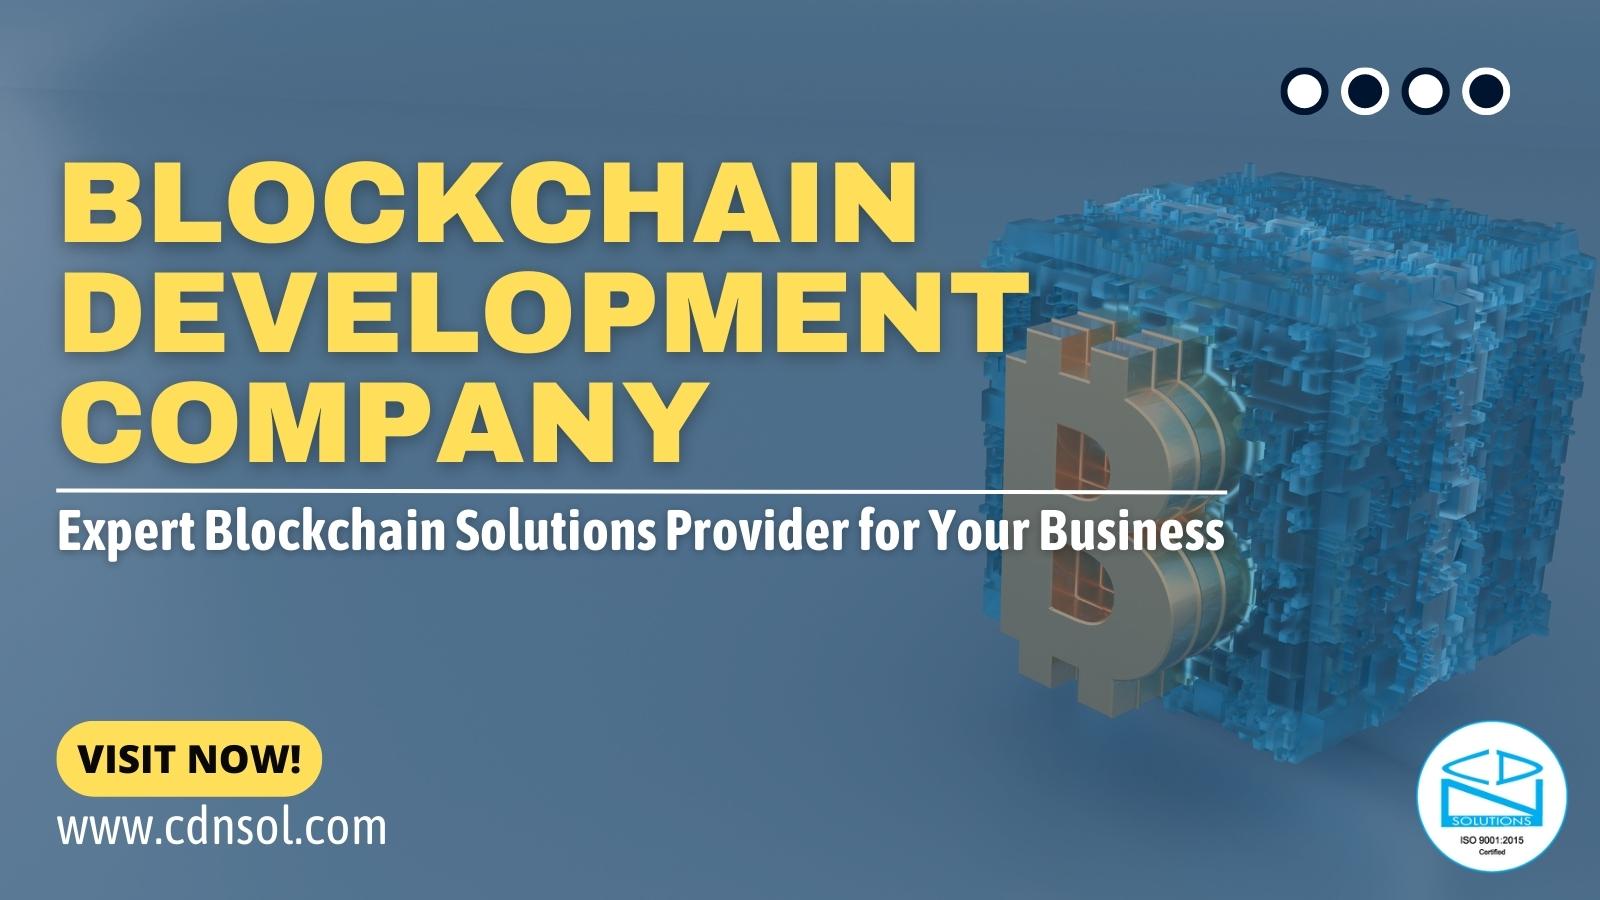 Top Blockchain Development Company in USA - Expert Solutions for Your Business